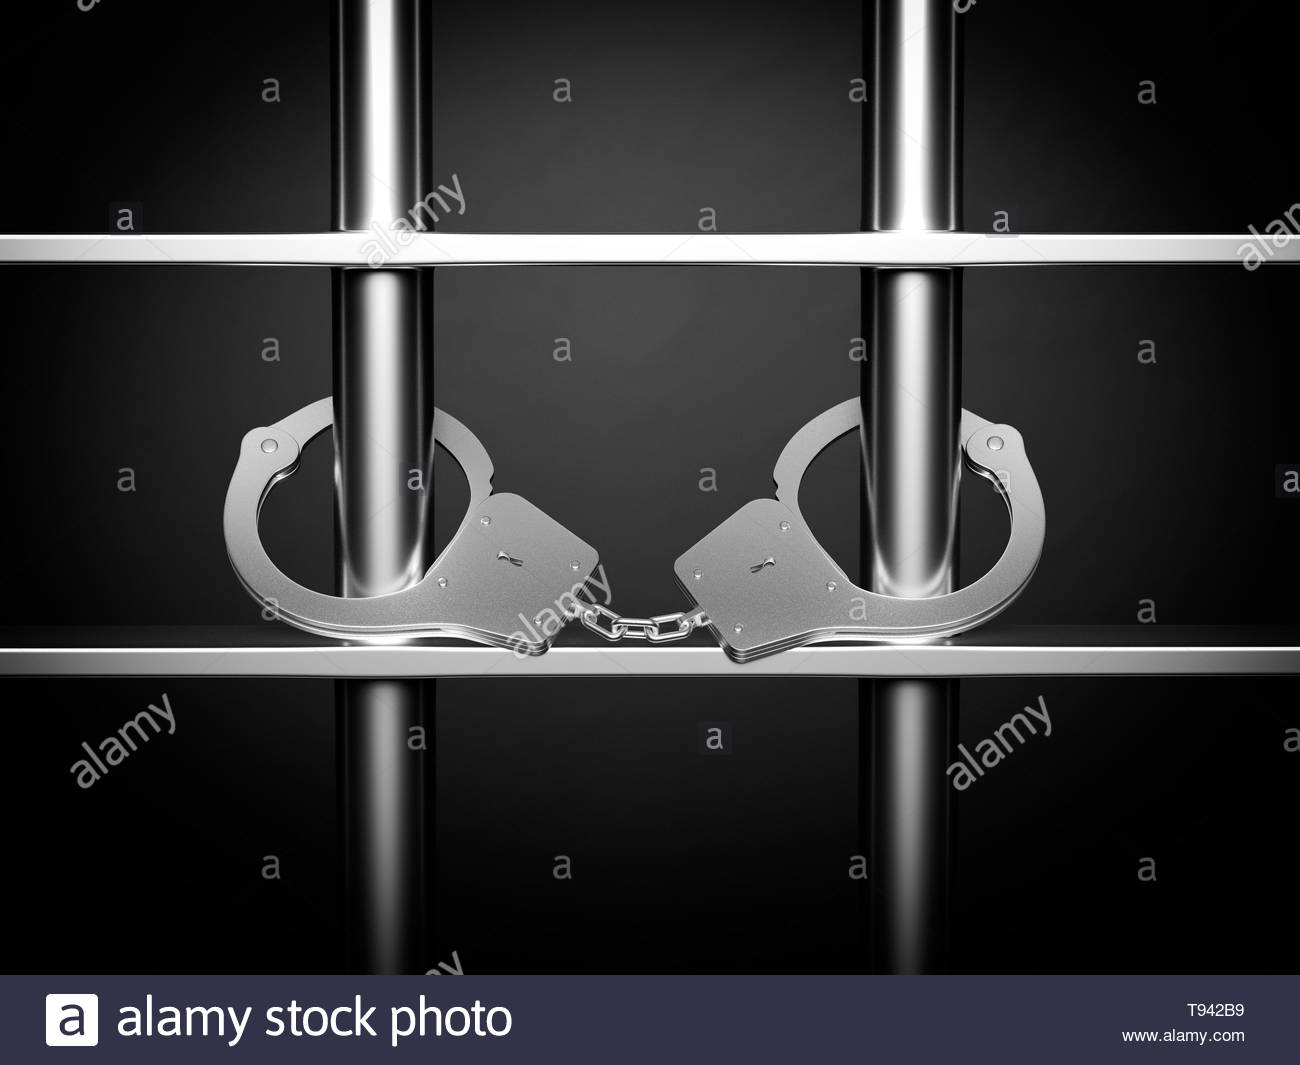 Handcuffs Closed On Prison Metal Bars Criminal Background 3d